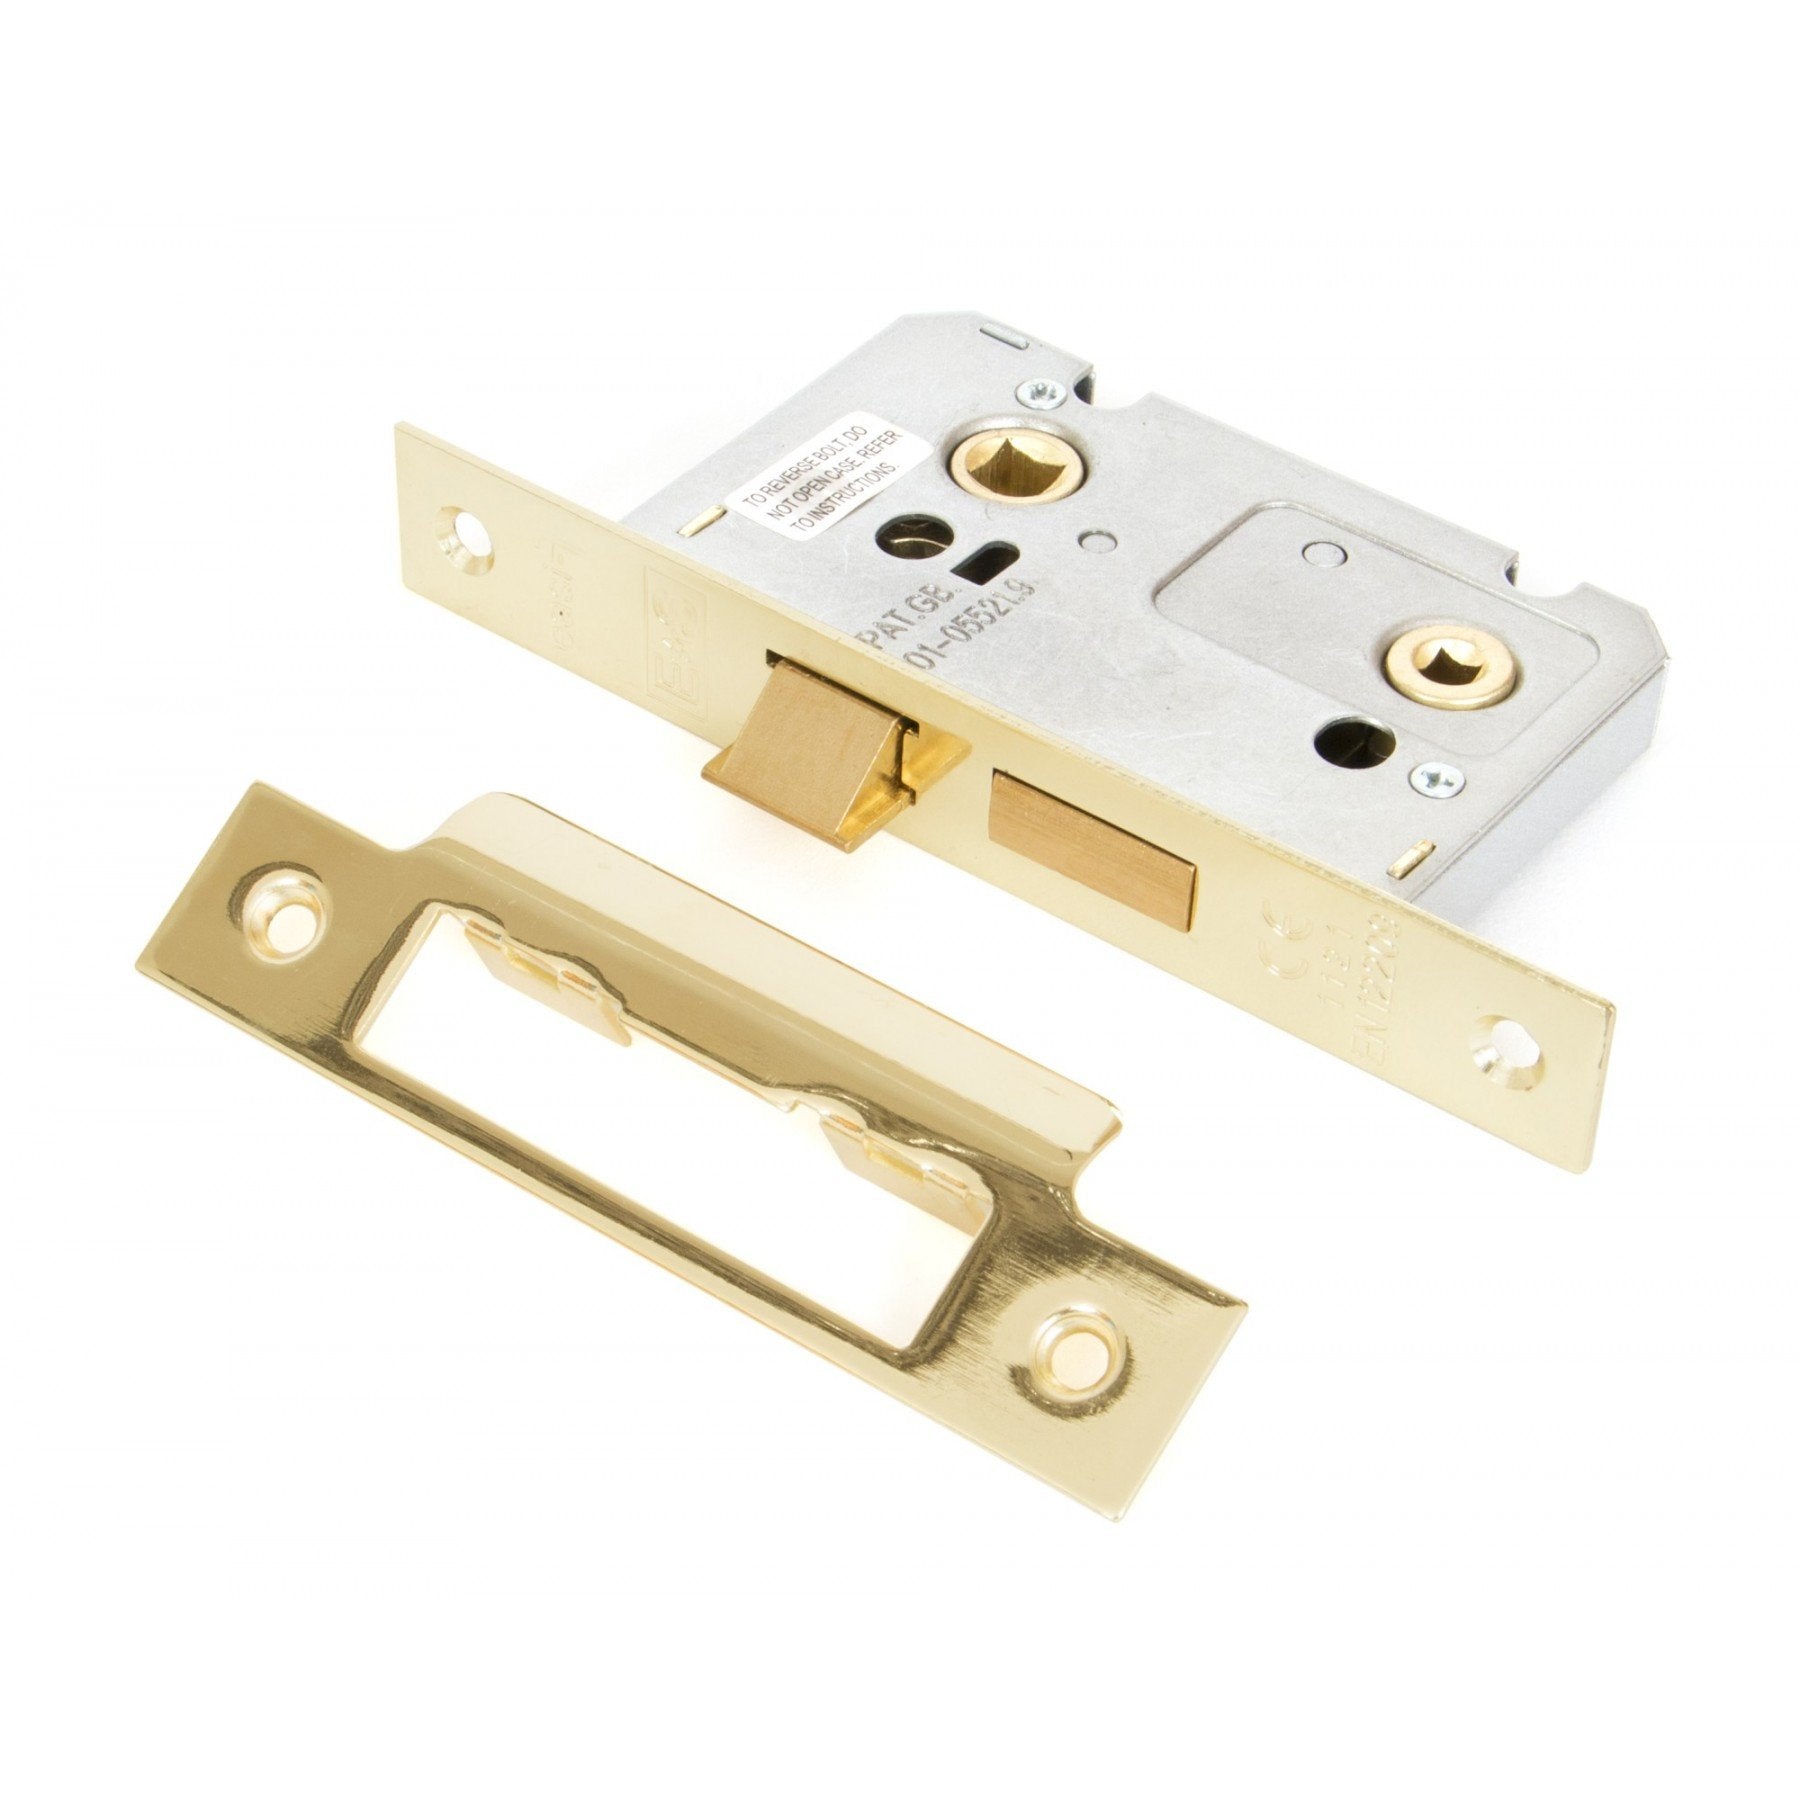 From the Anvil Electro Brass 2 1/2" Bathroom Mortice Lock - No.42 Interiors